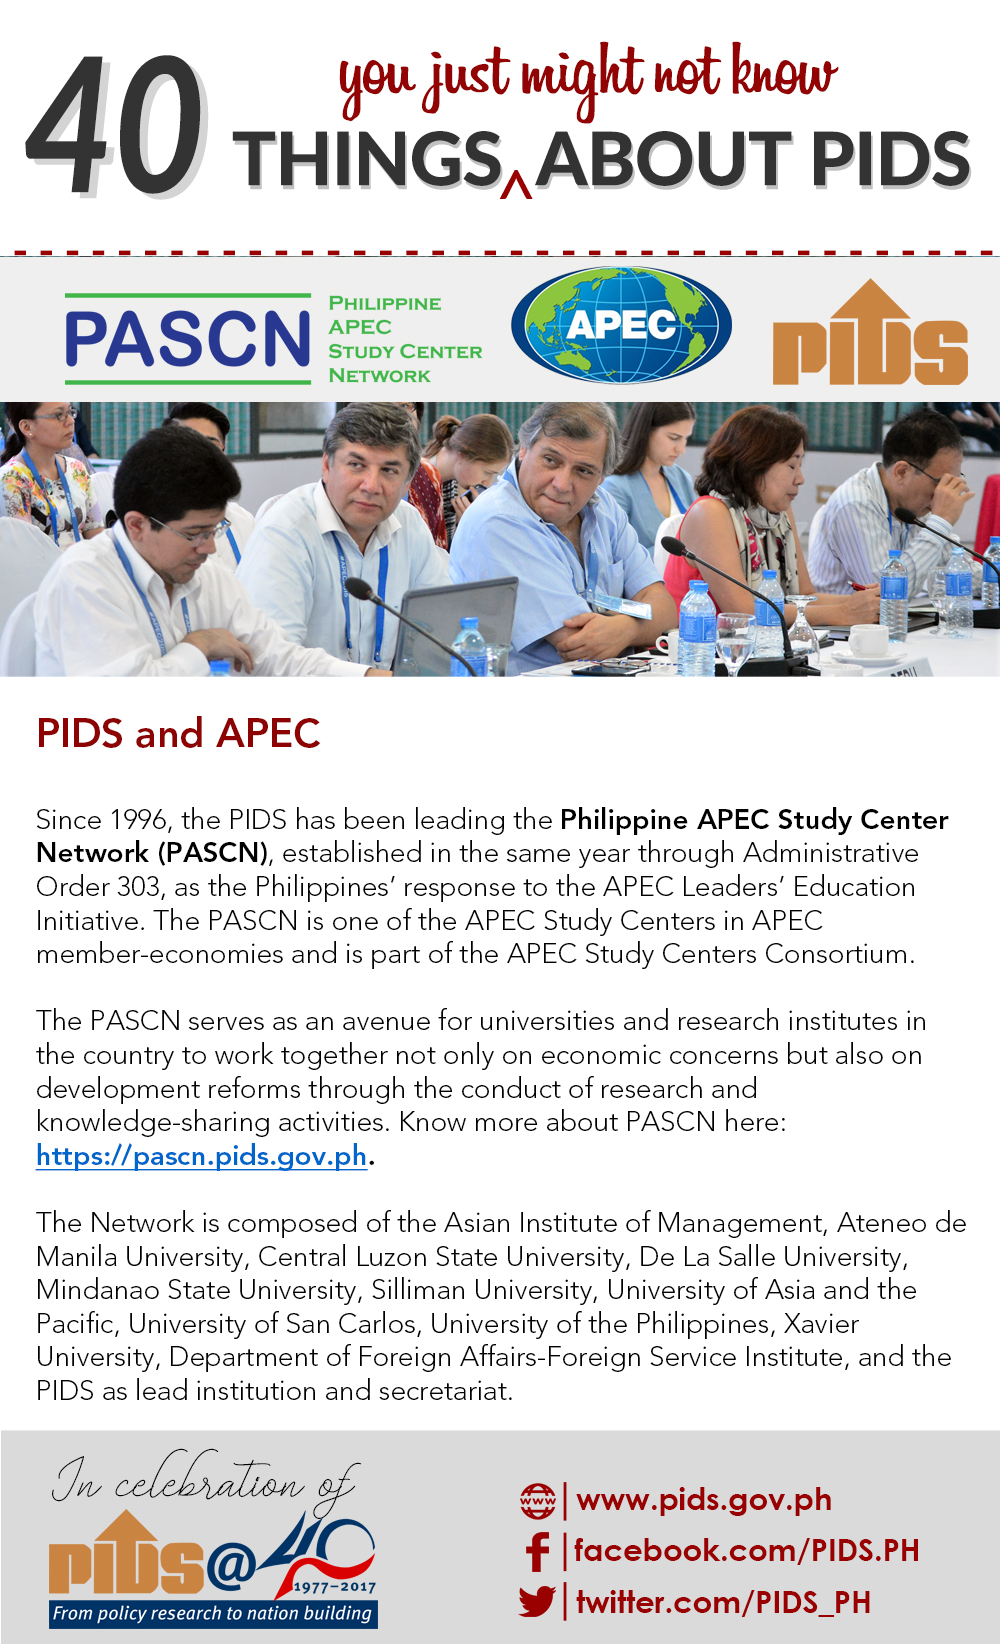 18of40-things_about_pids-pascn.jpg